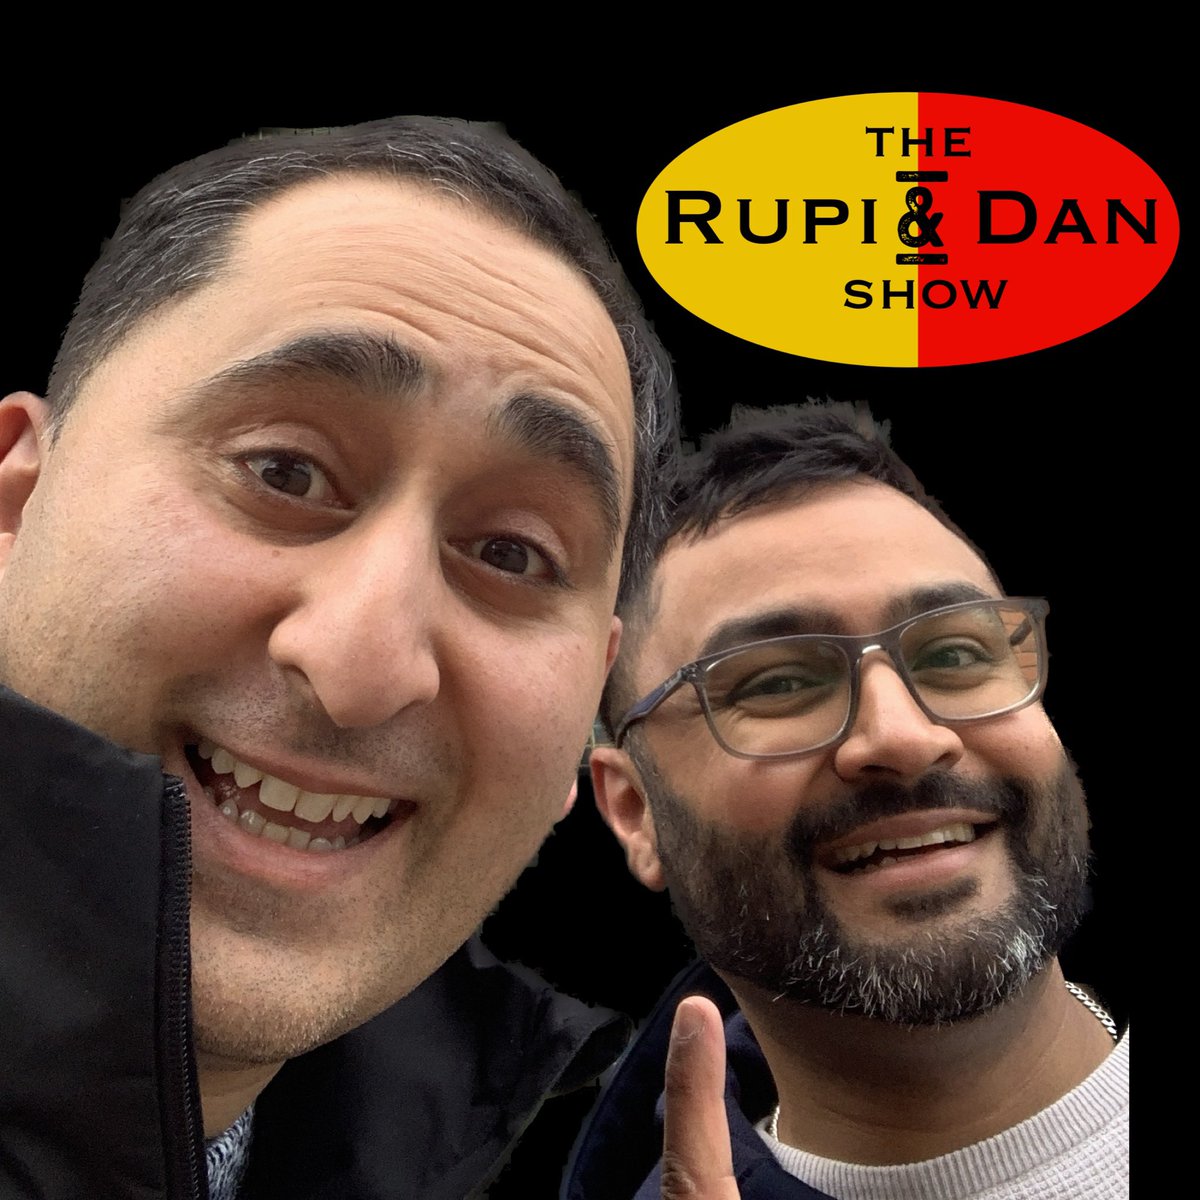 It’s the RUPI & DAN show! Tune into the #NewPodcast from myself & @________Danny THE-D.A.N.-Network @youtube sponsored by Halo & Cross. Click link: youtu.be/yepTQgKpElk?si… We’re two #punjabi boys from #WestBrom talking all things #films #oscars #AcademyAwards & #wwe #wrestling